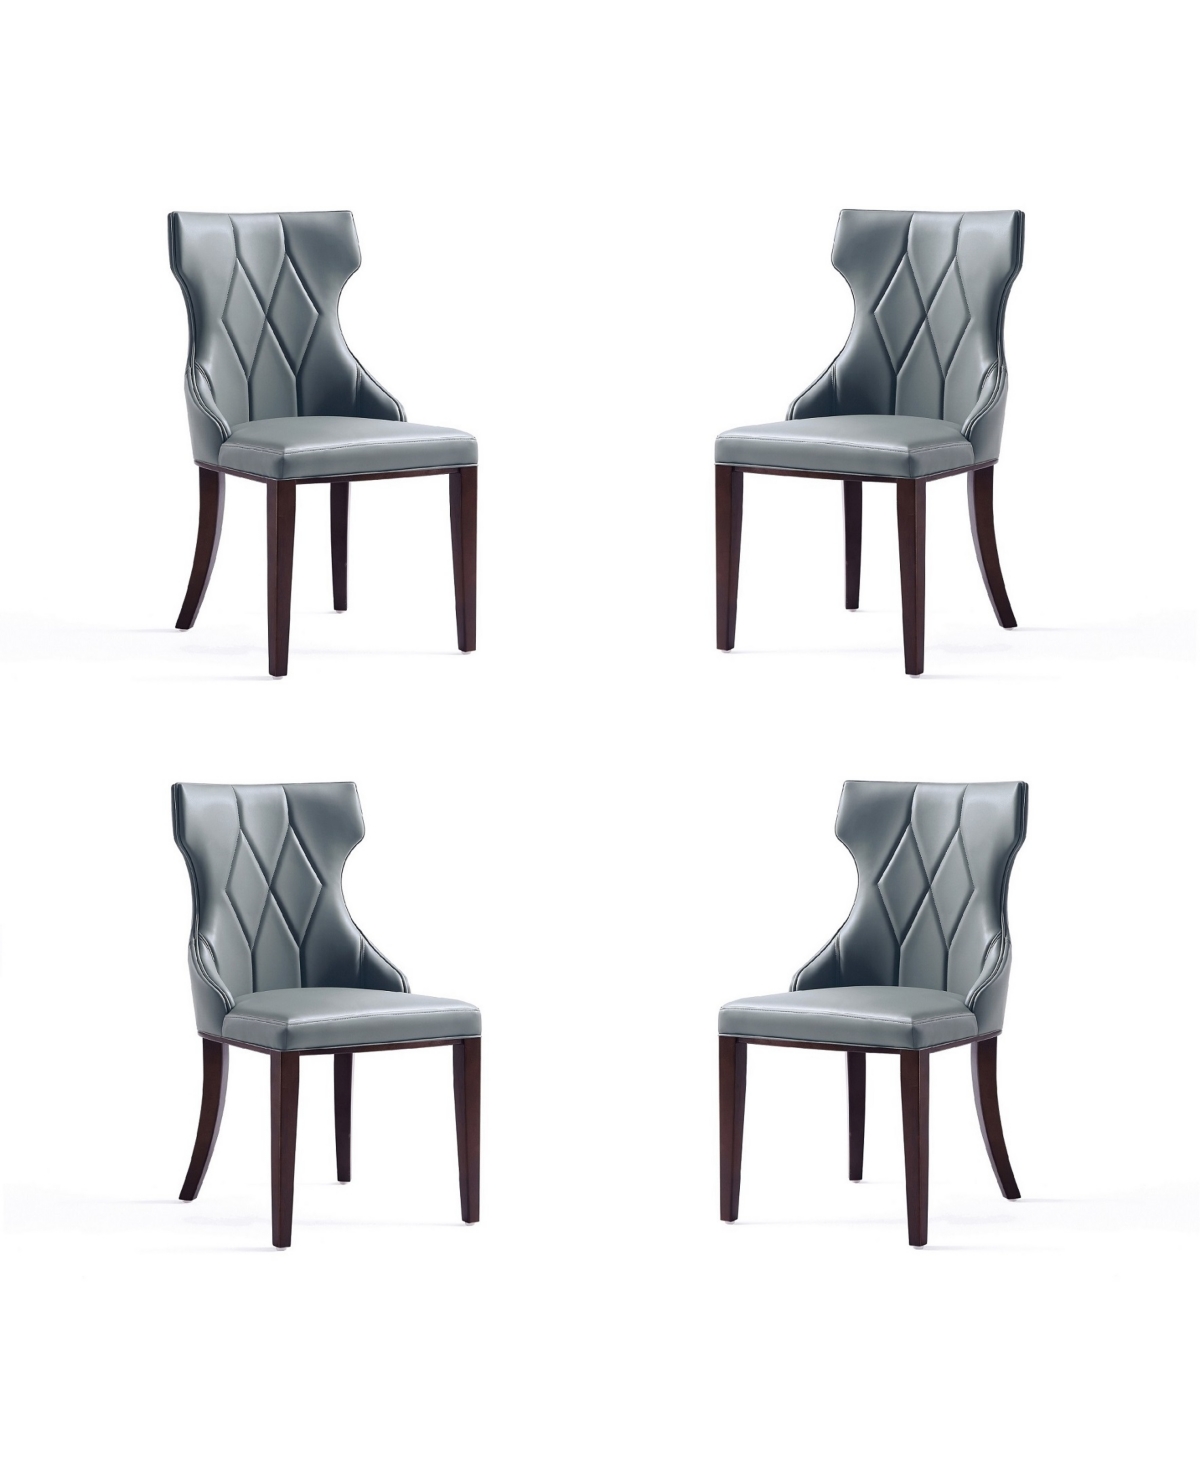 Manhattan Comfort Reine 4-piece Beech Wood Faux Leather Upholstered Dining Chair Set In Pebble Gray